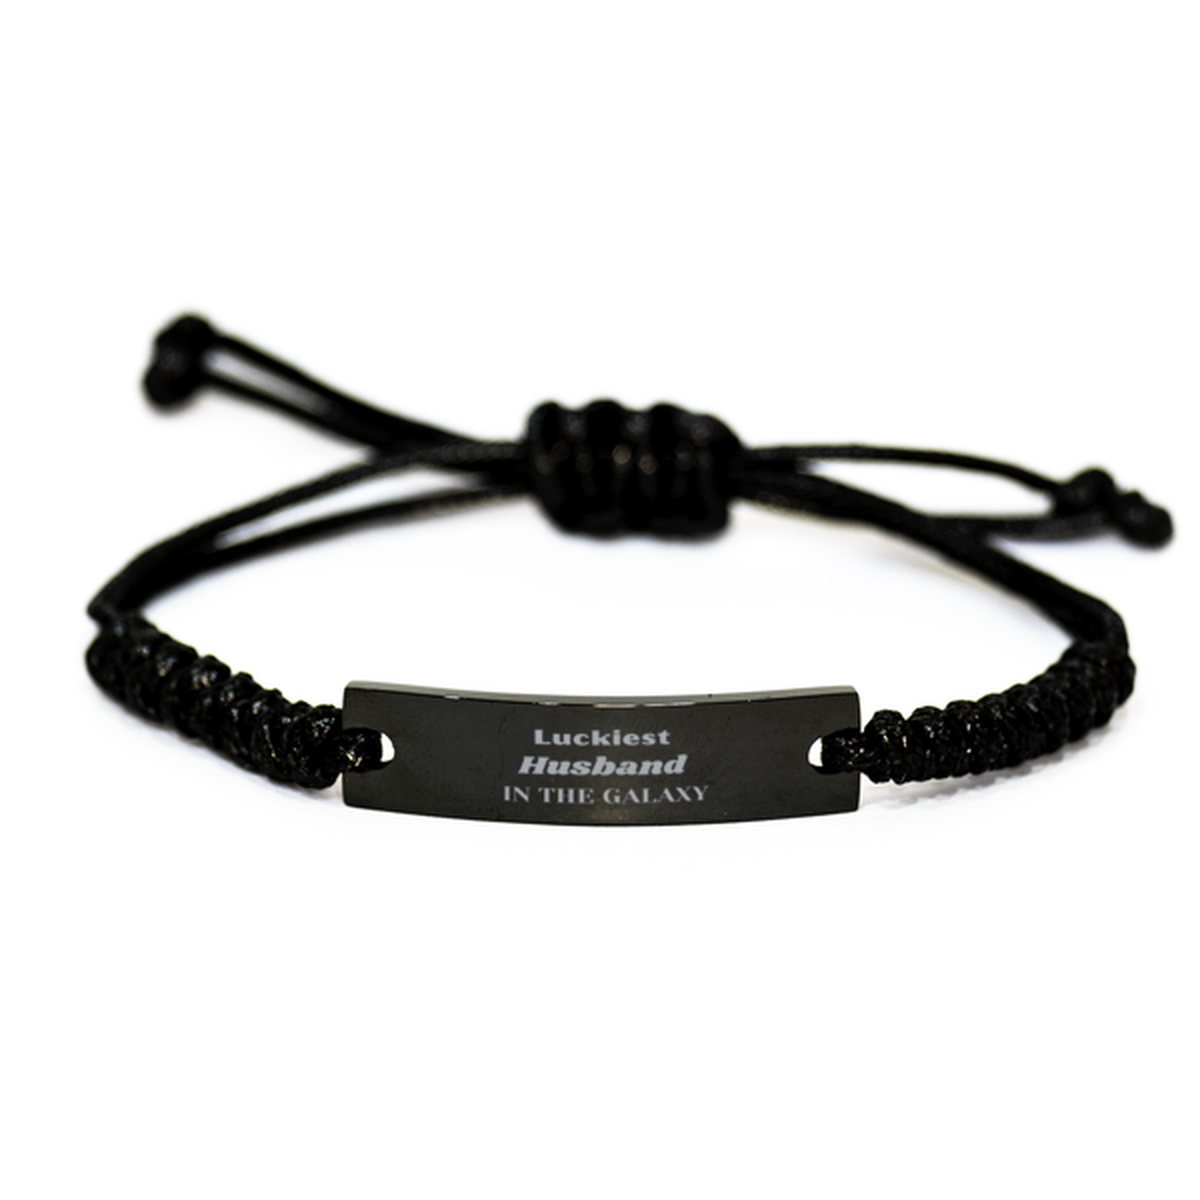 Luckiest Husband in the Galaxy, To My Husband Engraved Gifts, Christmas Husband Black Rope Bracelet Gifts, X-mas Birthday Unique Gifts For Husband Men Women